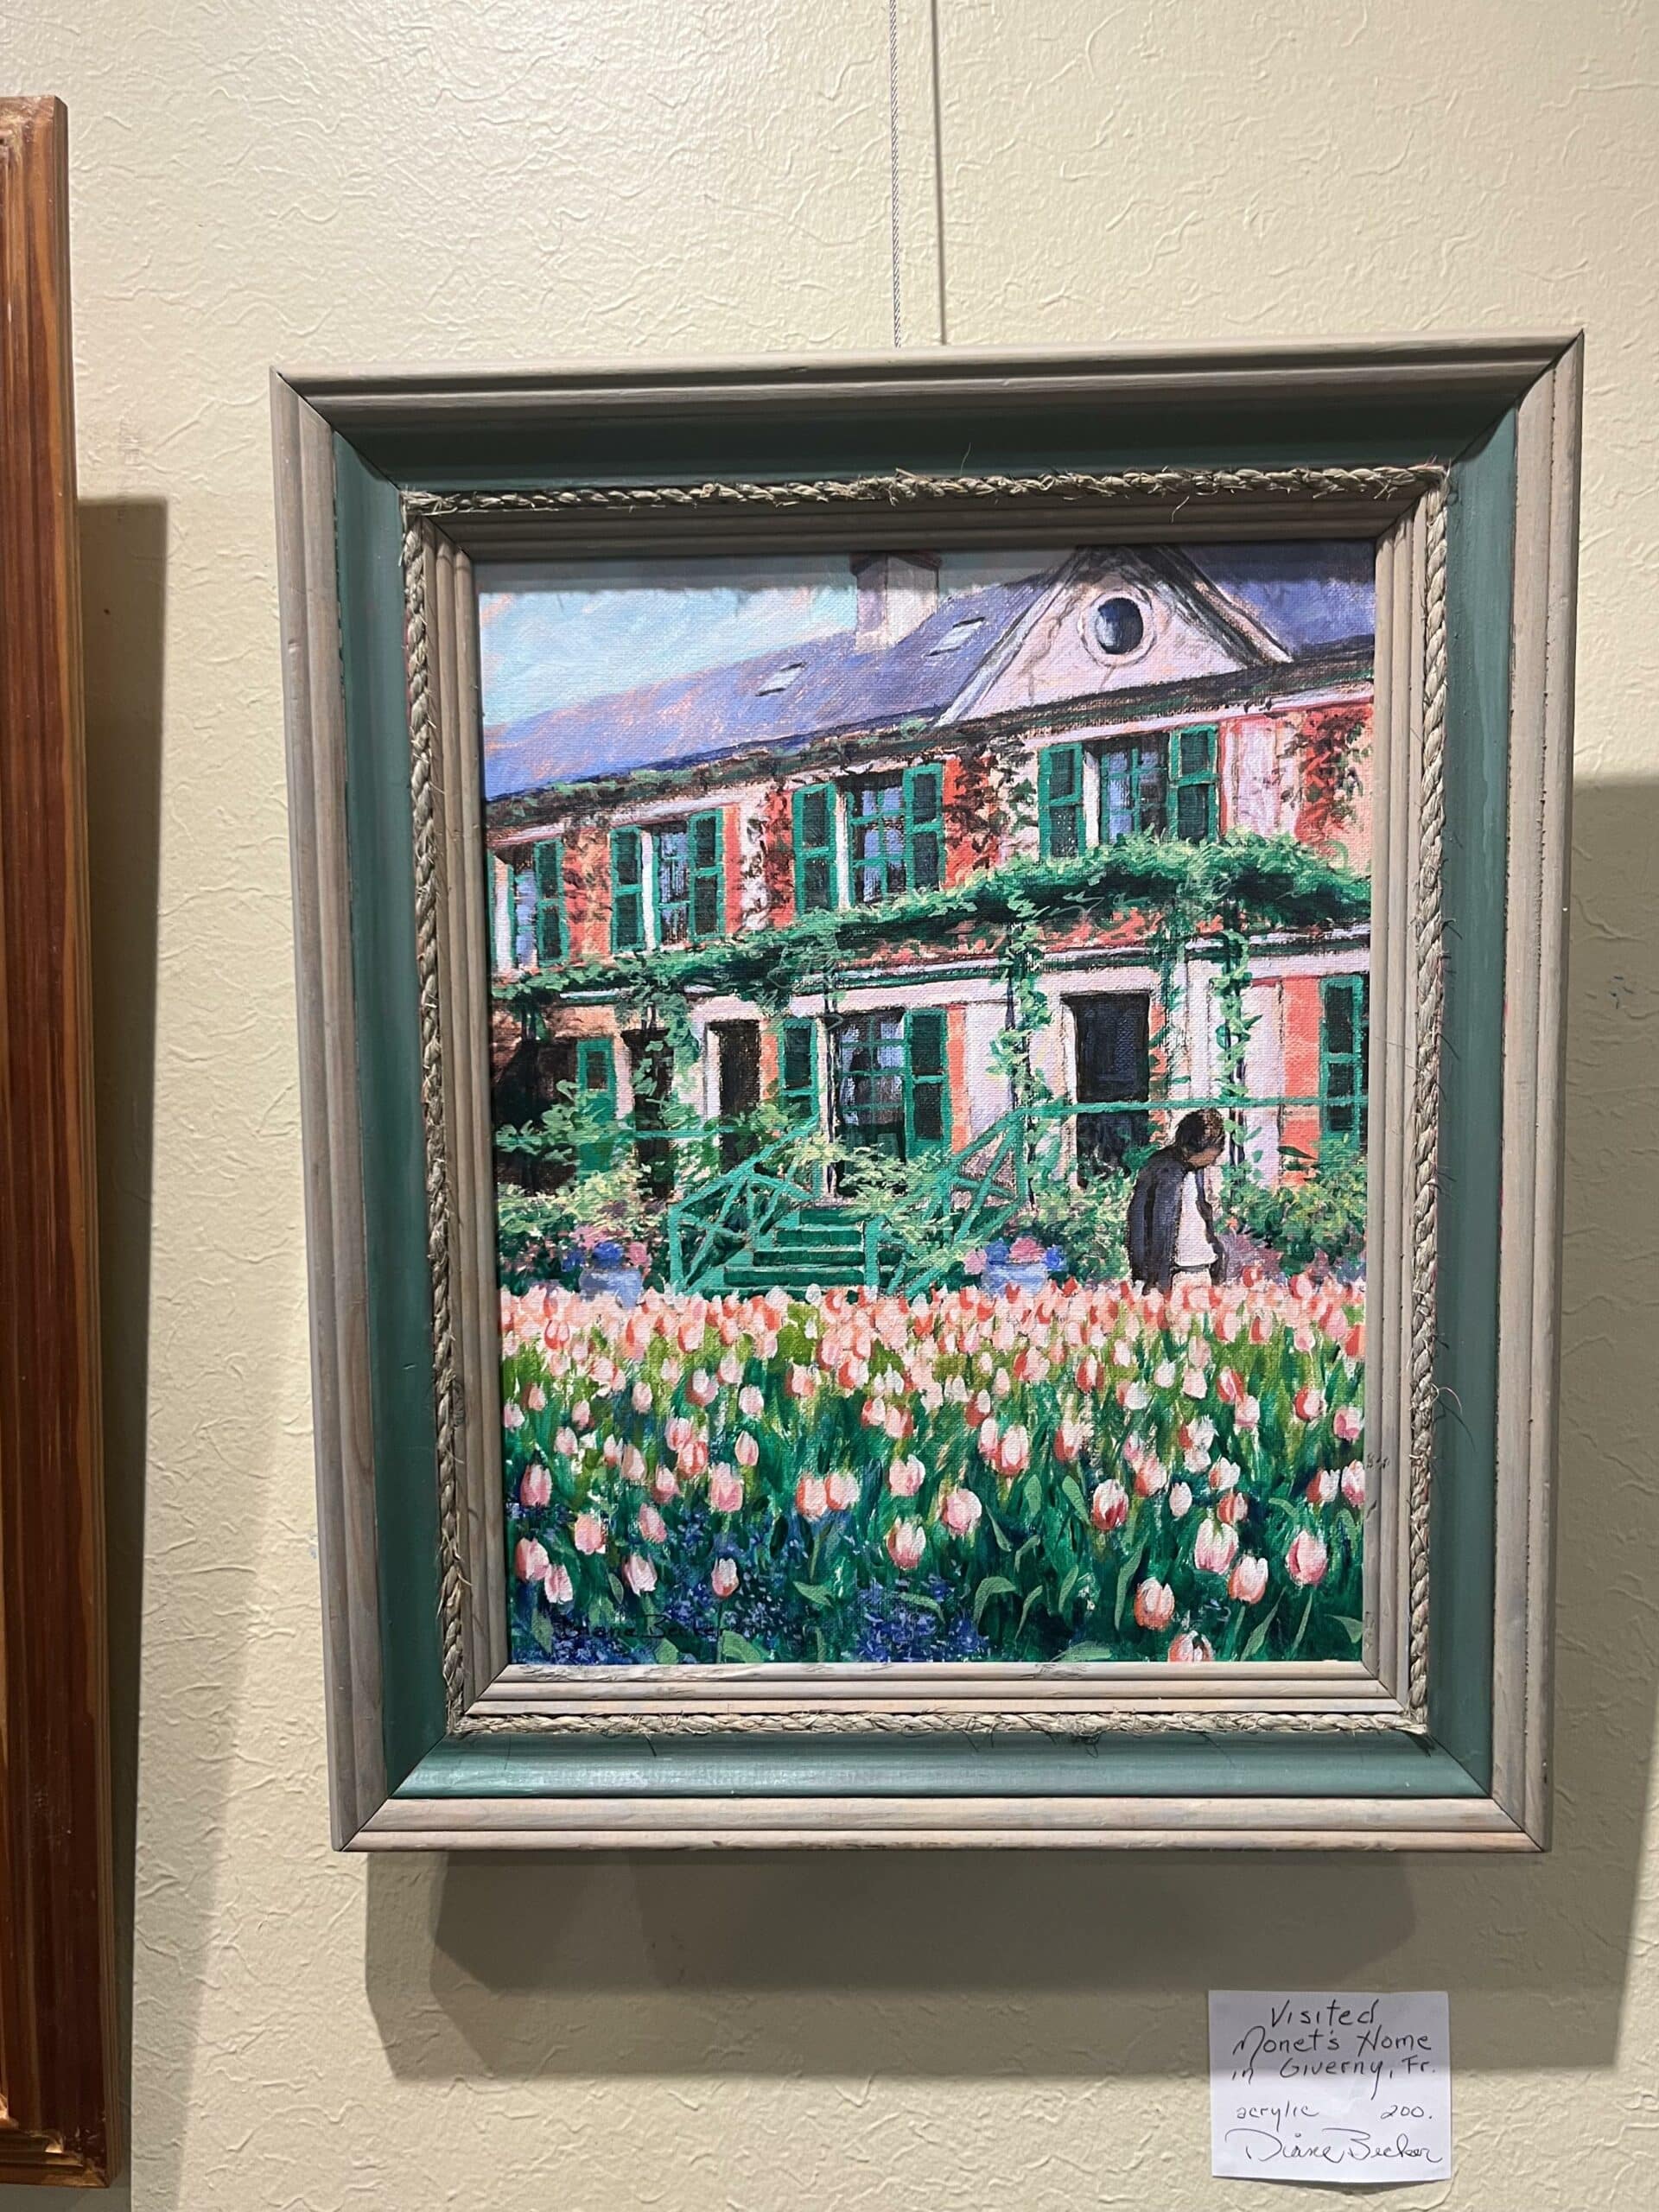 Visited Monet's Home by Diane Becker. [Photo provided by Pedram Moghaddam]